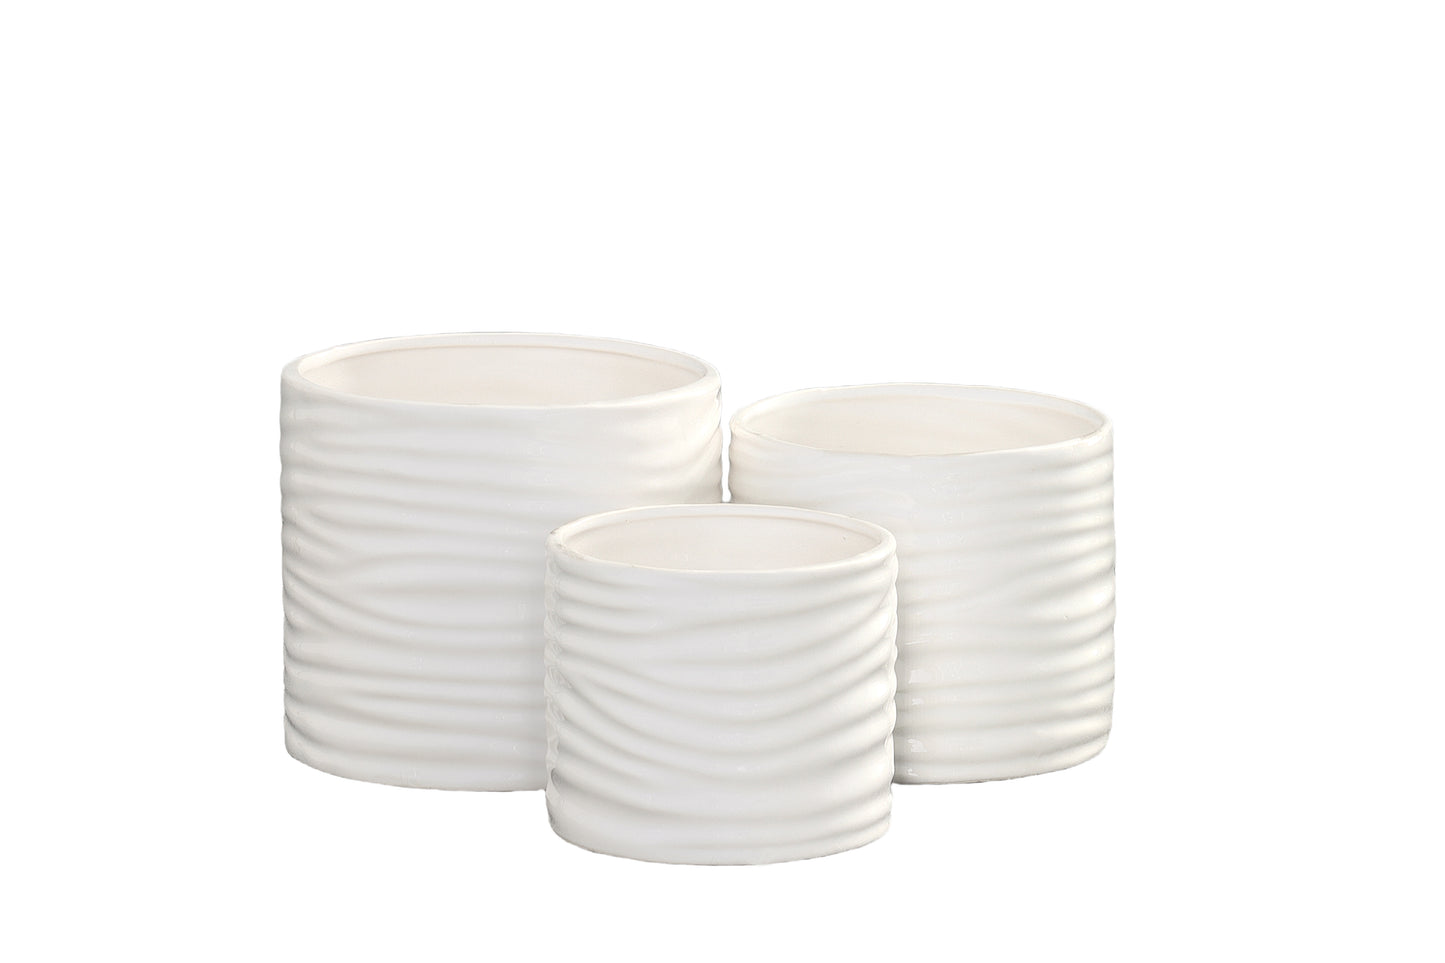 Ceramic Low Round Pot with Ribbed Design Body, Set of 3